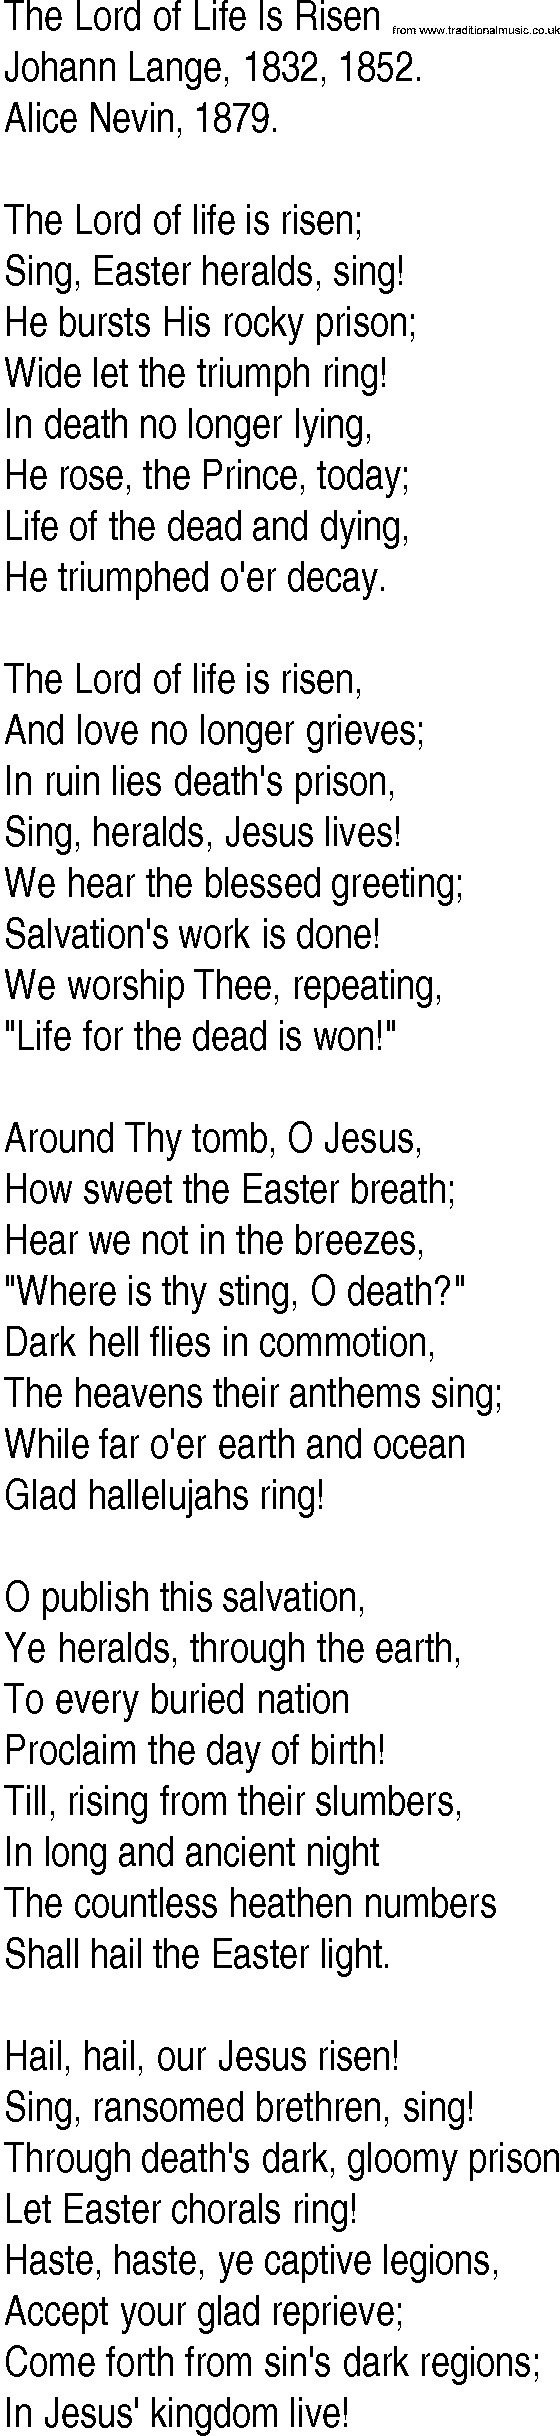 Hymn and Gospel Song: The Lord of Life Is Risen by Johann Lange lyrics